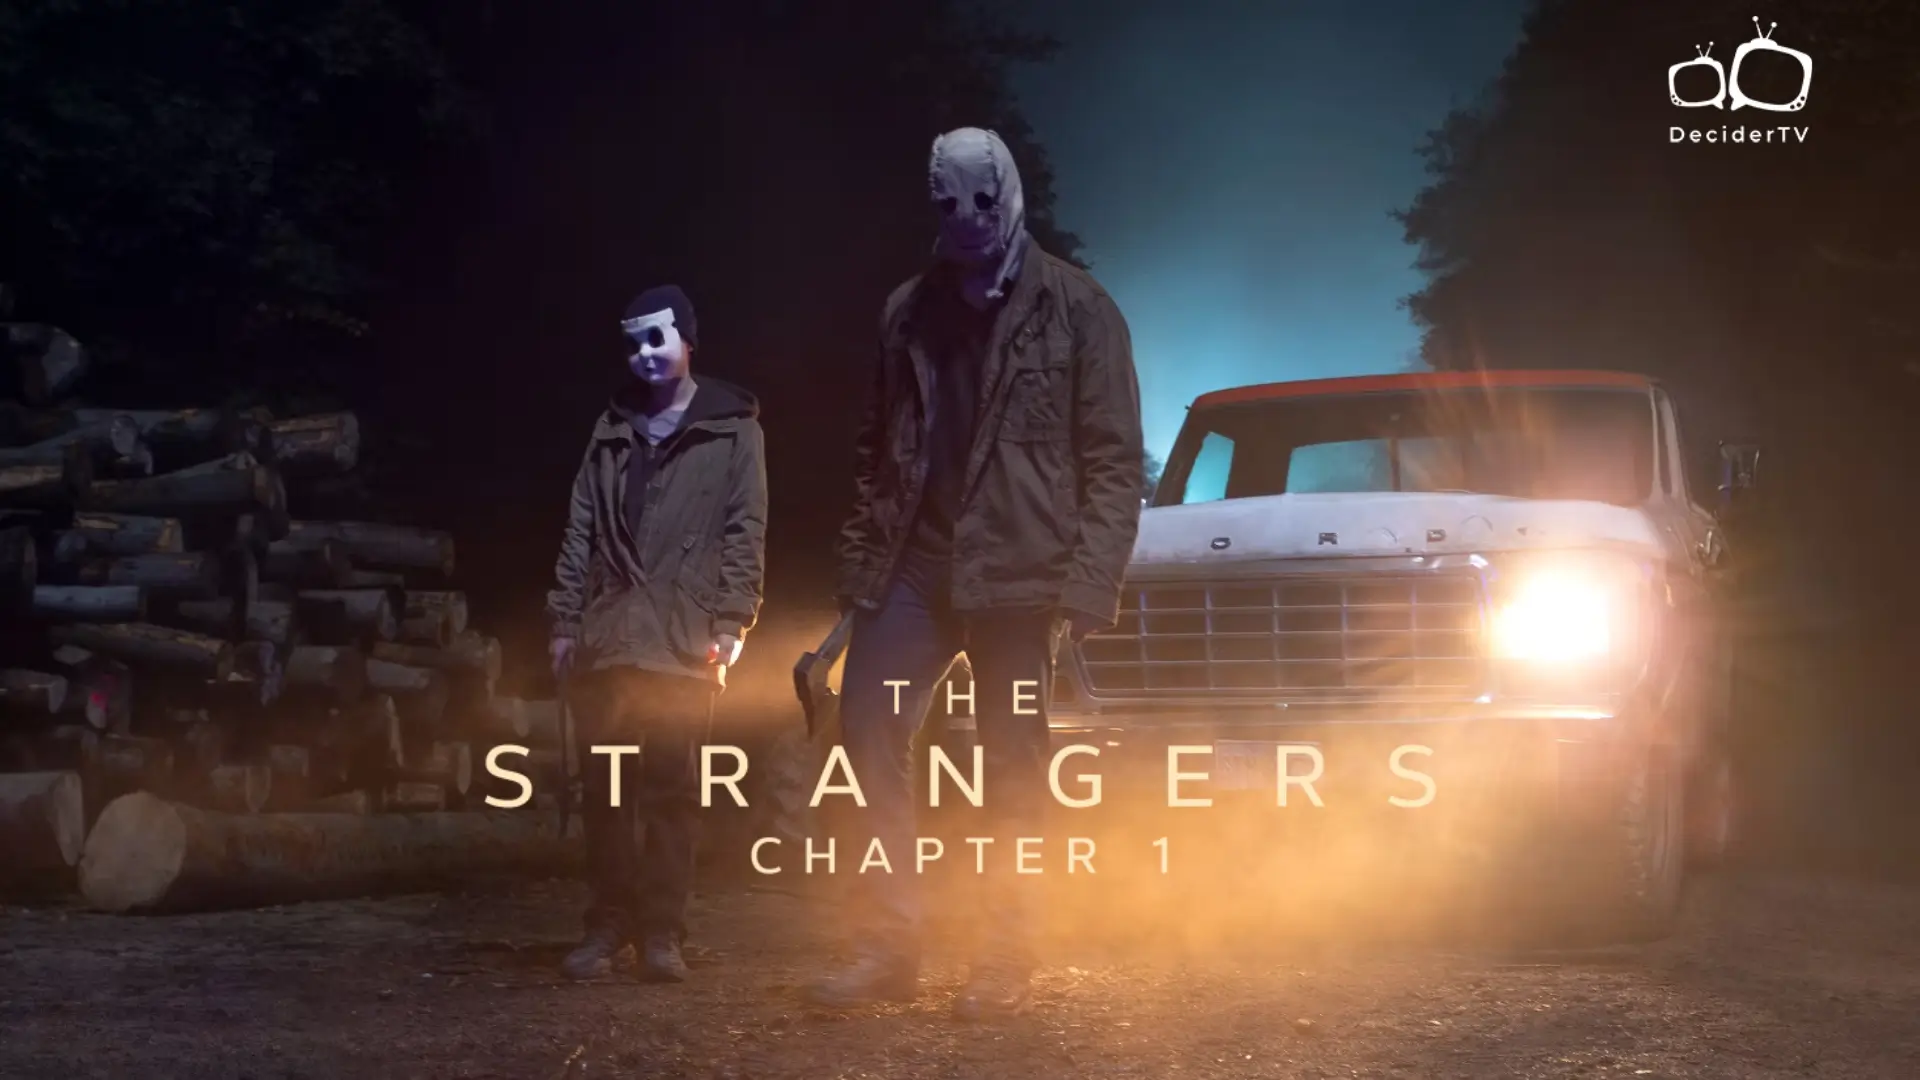 The Strangers Chapter 1